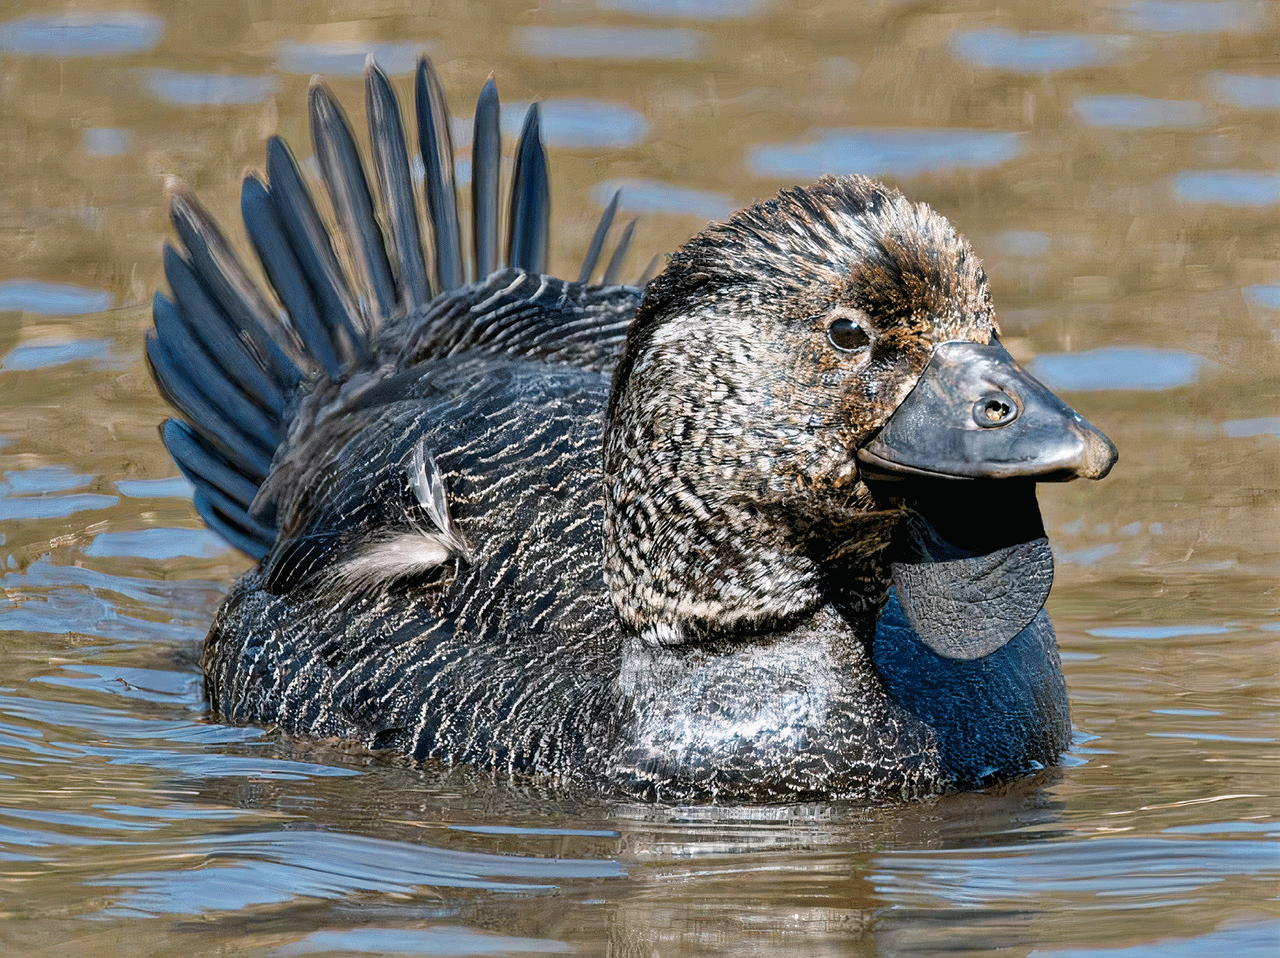 Musk Duck from Australia Can Mimic Human Speech, Sound Clip Proves It